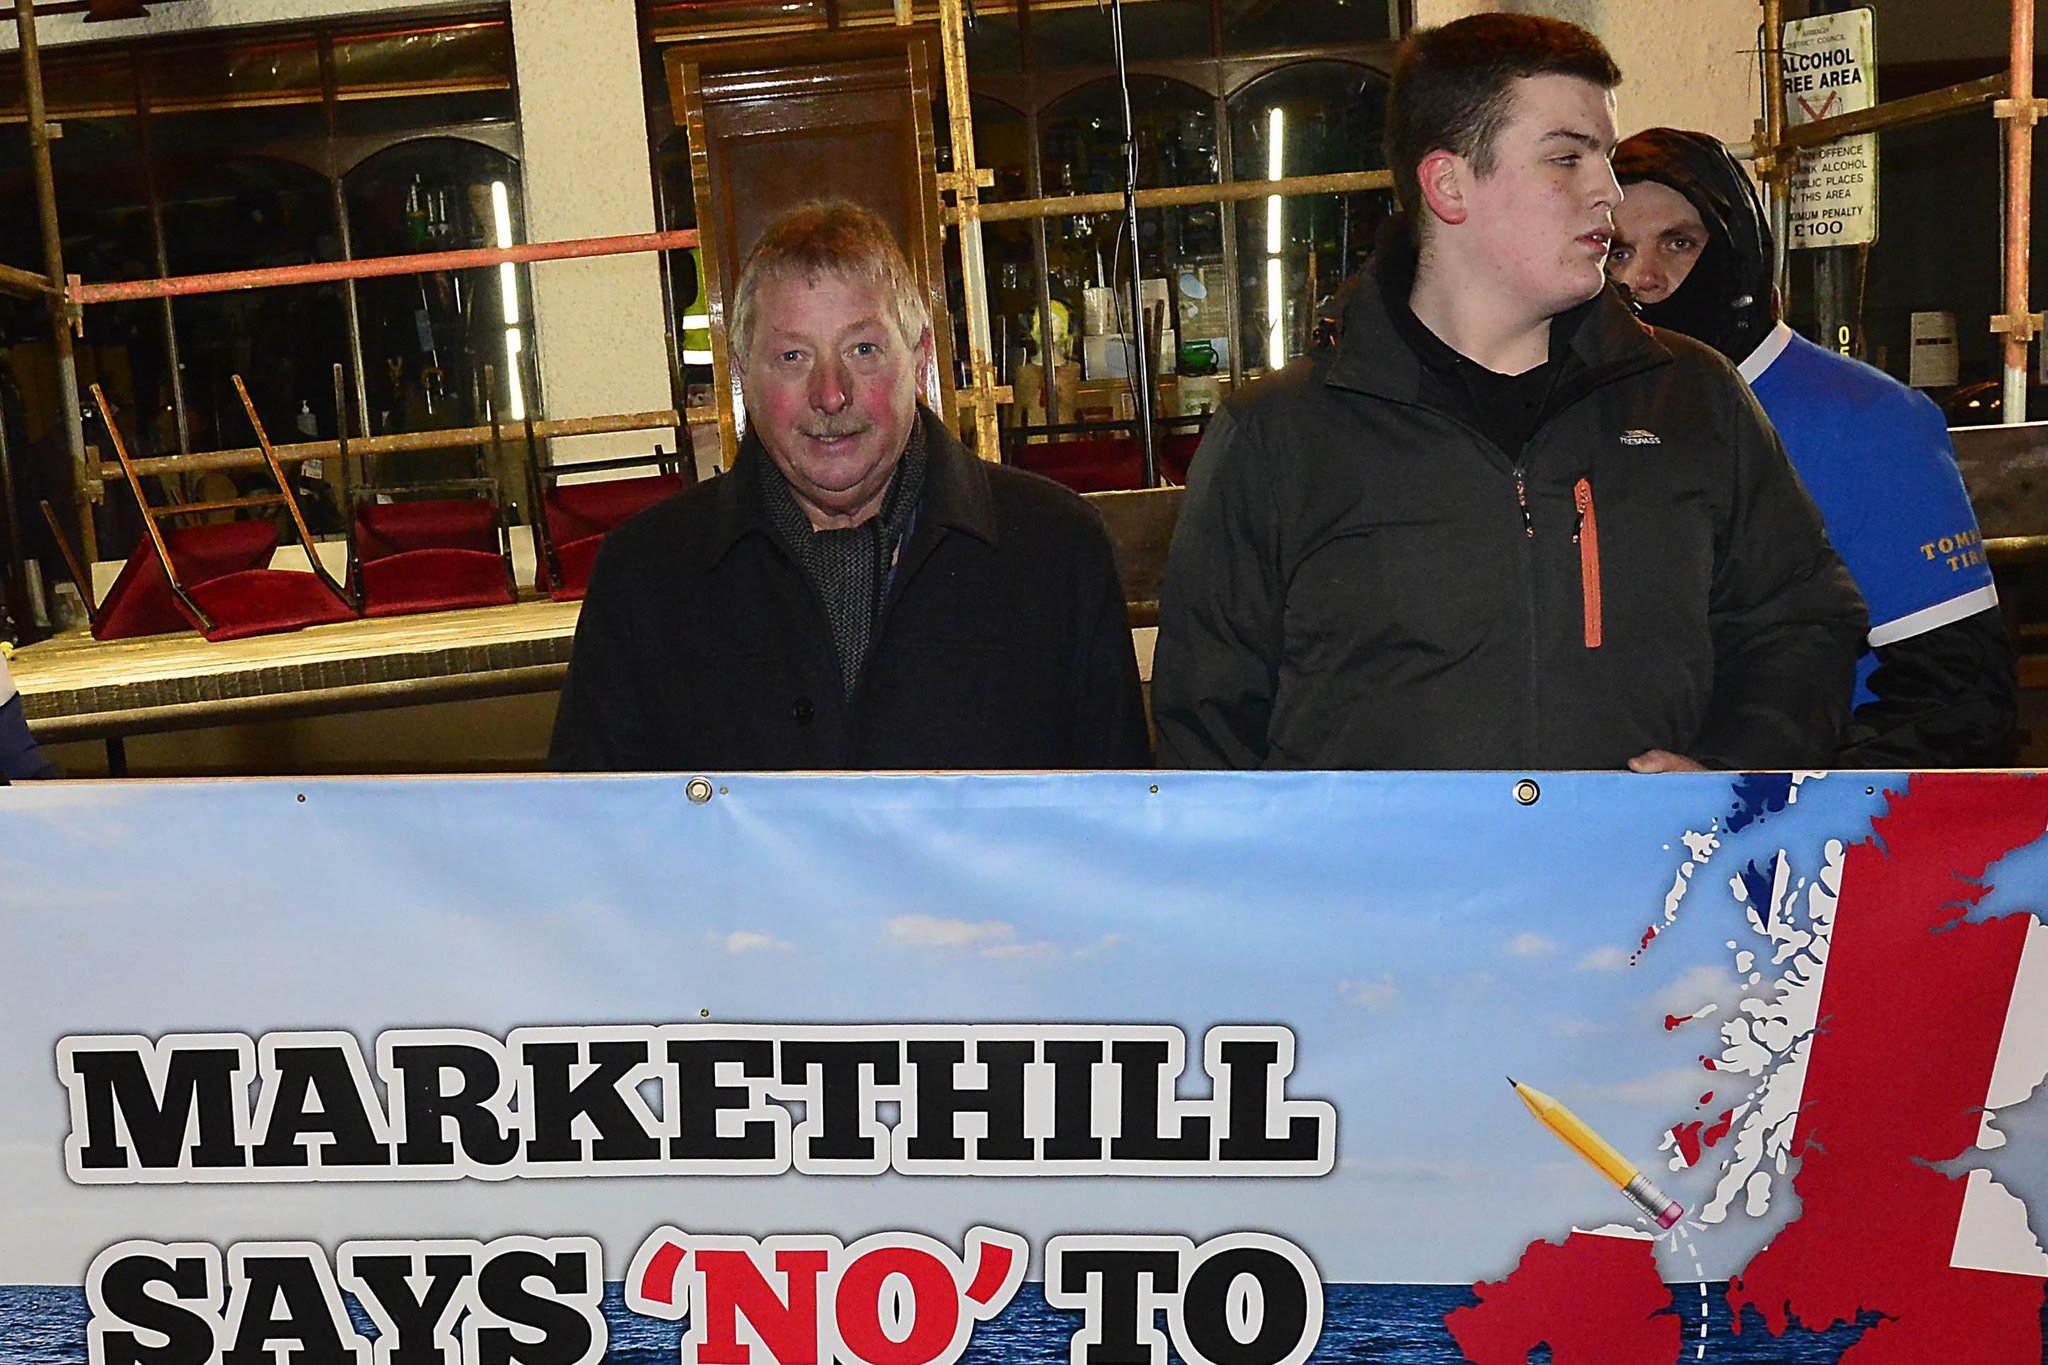 Unionist 'in-fighting' continues after Markethill protest against NI Protocol